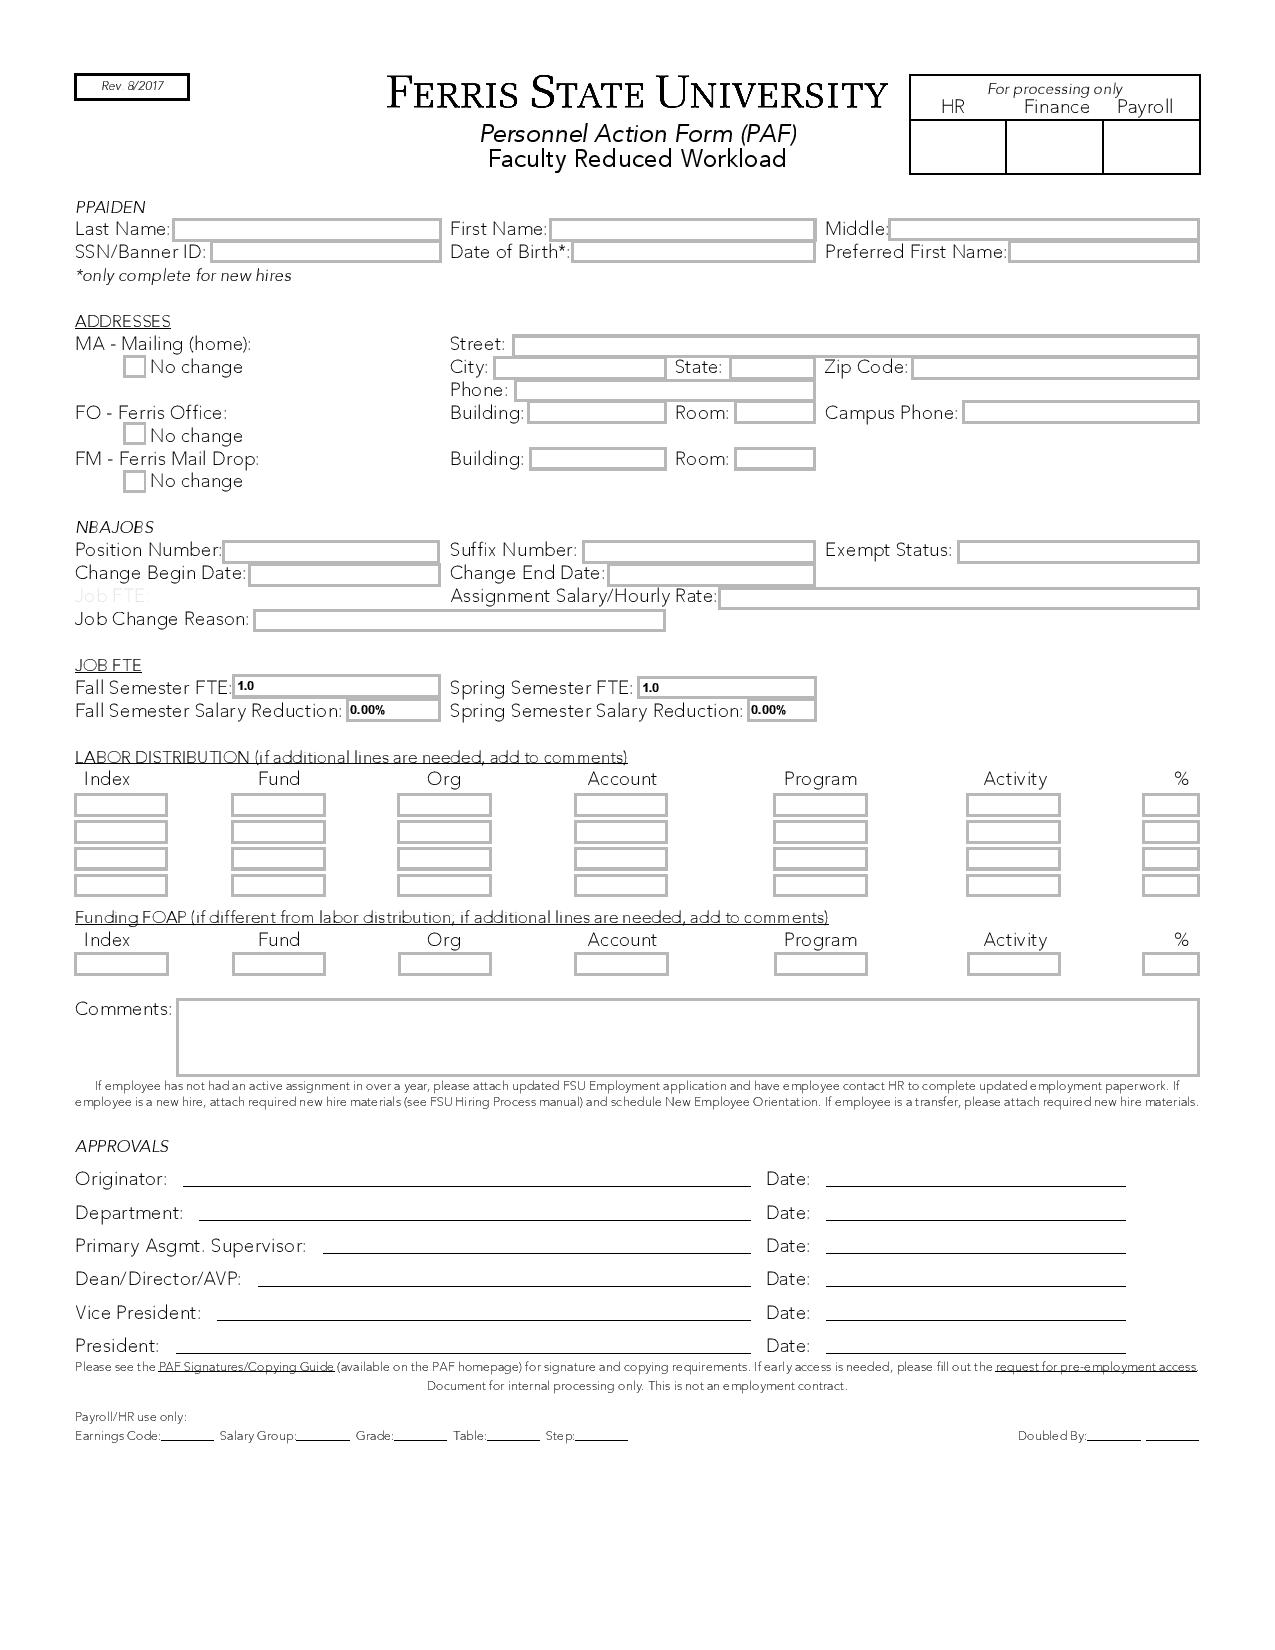 personnel action form reduced workload page 0011